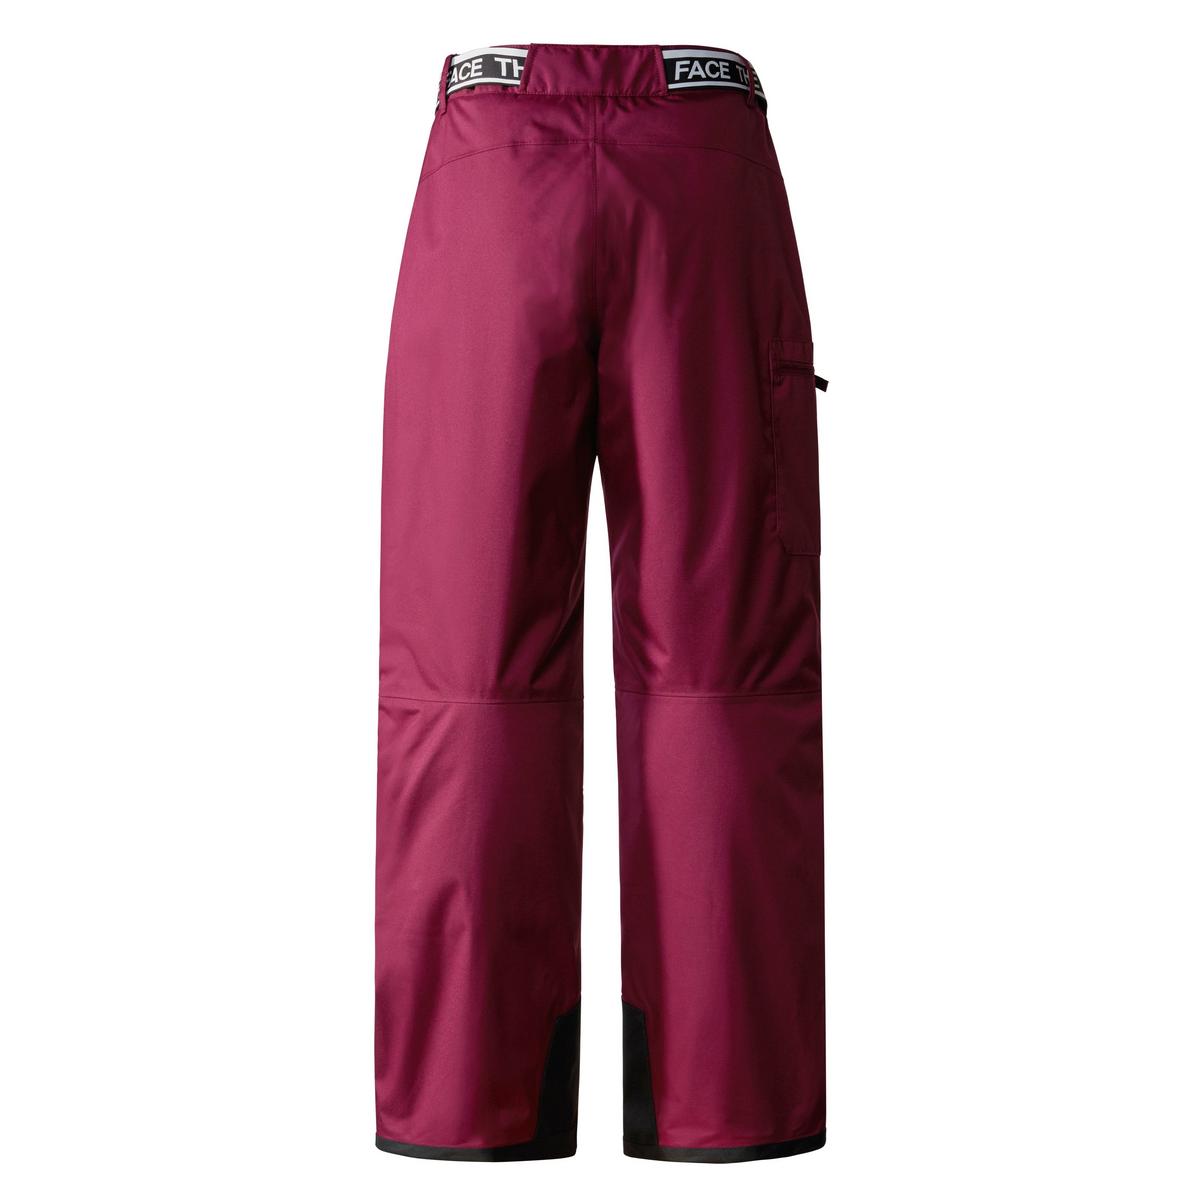 The North Face Girls' Freedom Insulated Ski Trousers - Purple